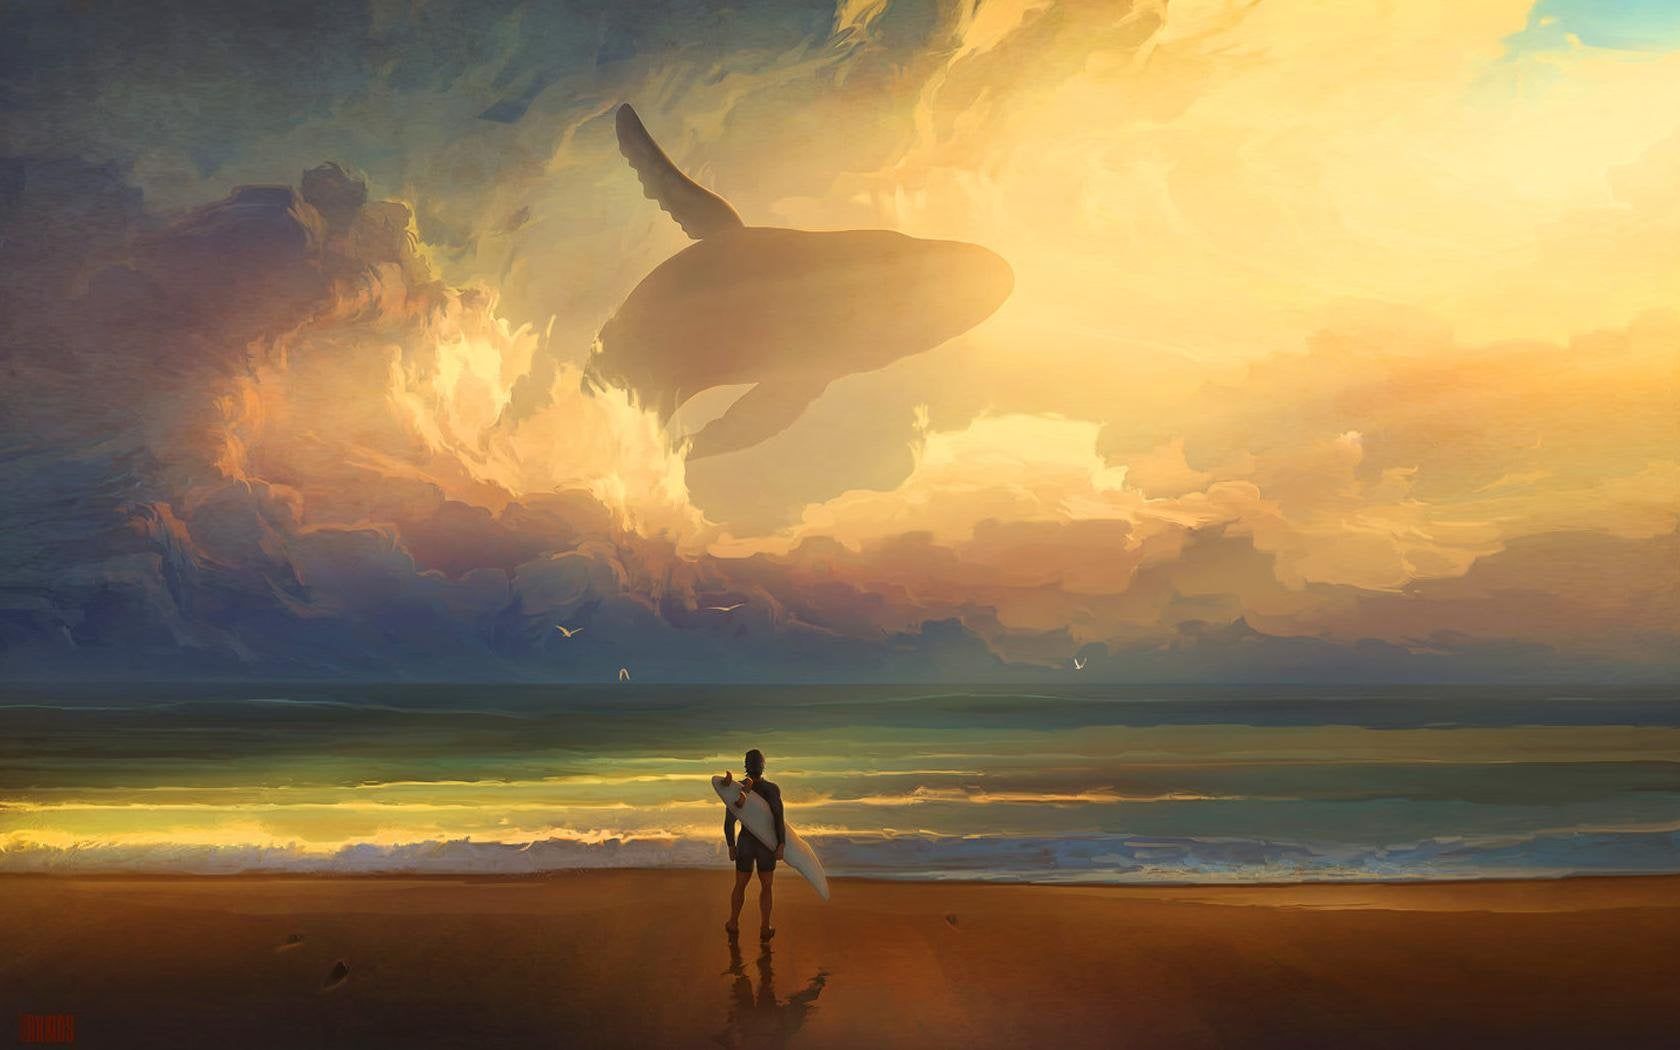 Awesome painting of a surfer looking up to a whale in the sky